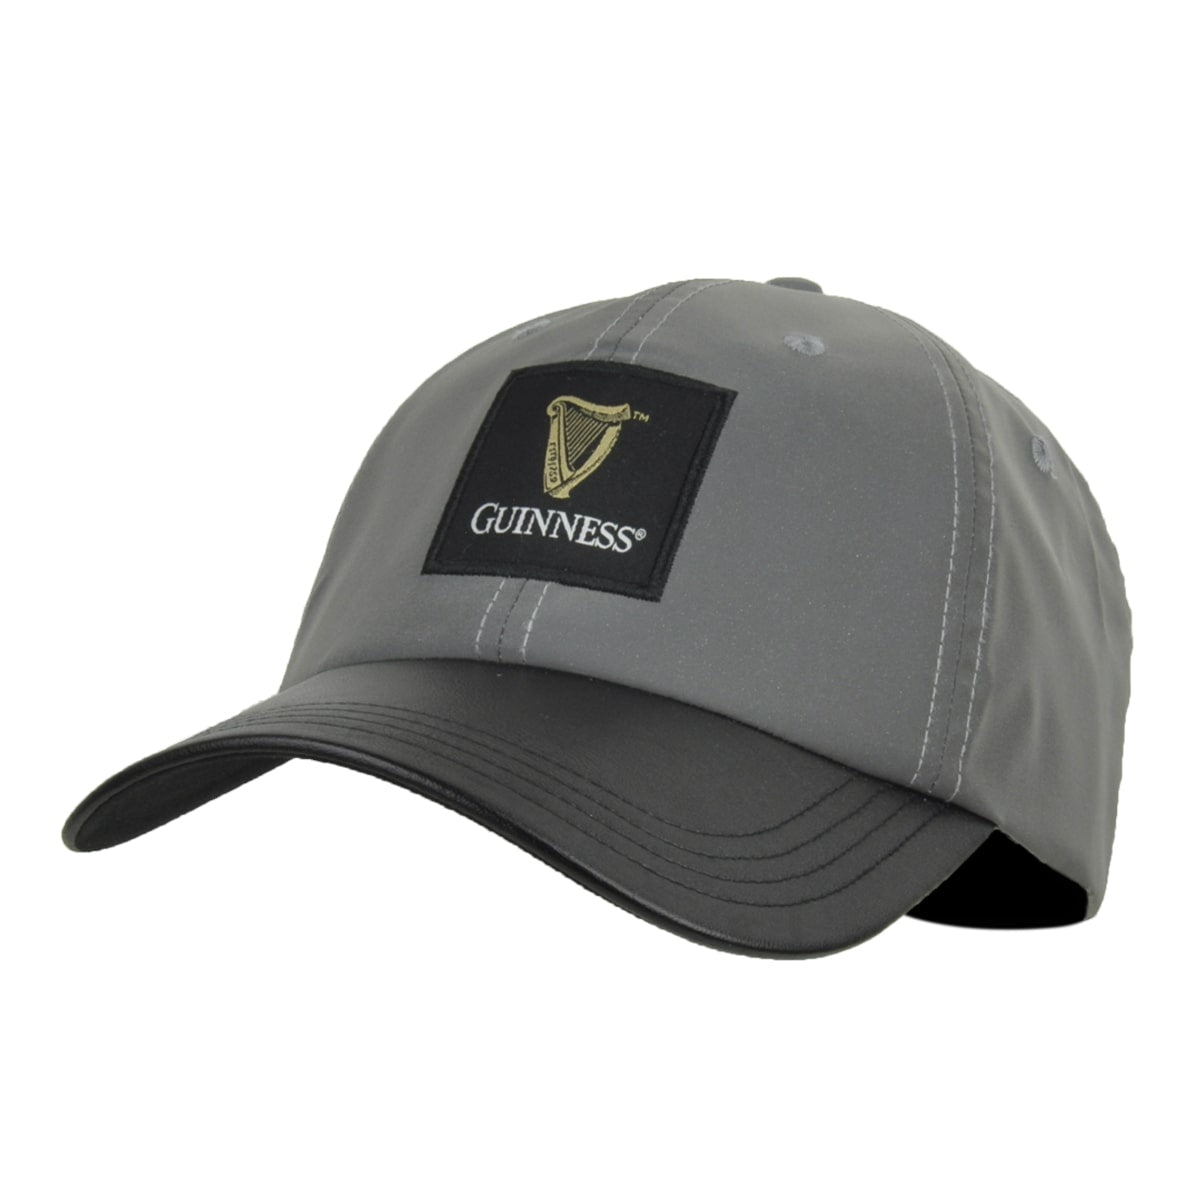 Adjustable size Guinness Reflective Cap with a Guinness logo on it.